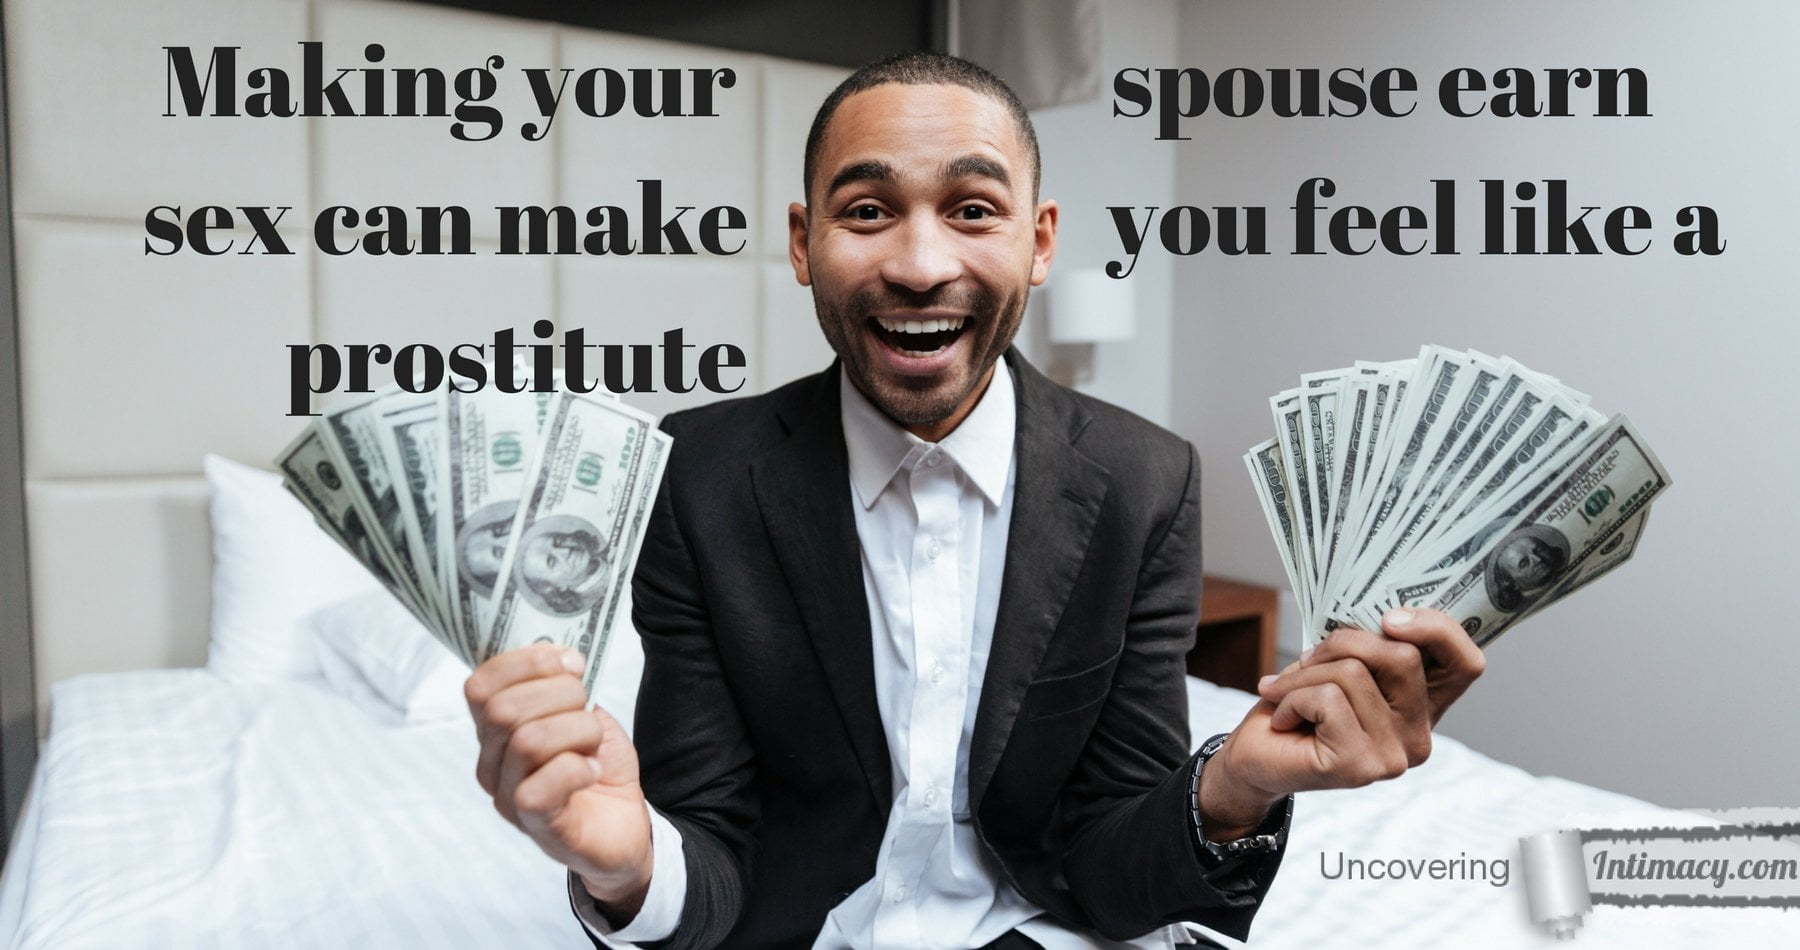 Making your spouse earn sex can make you feel like a prostitute pic